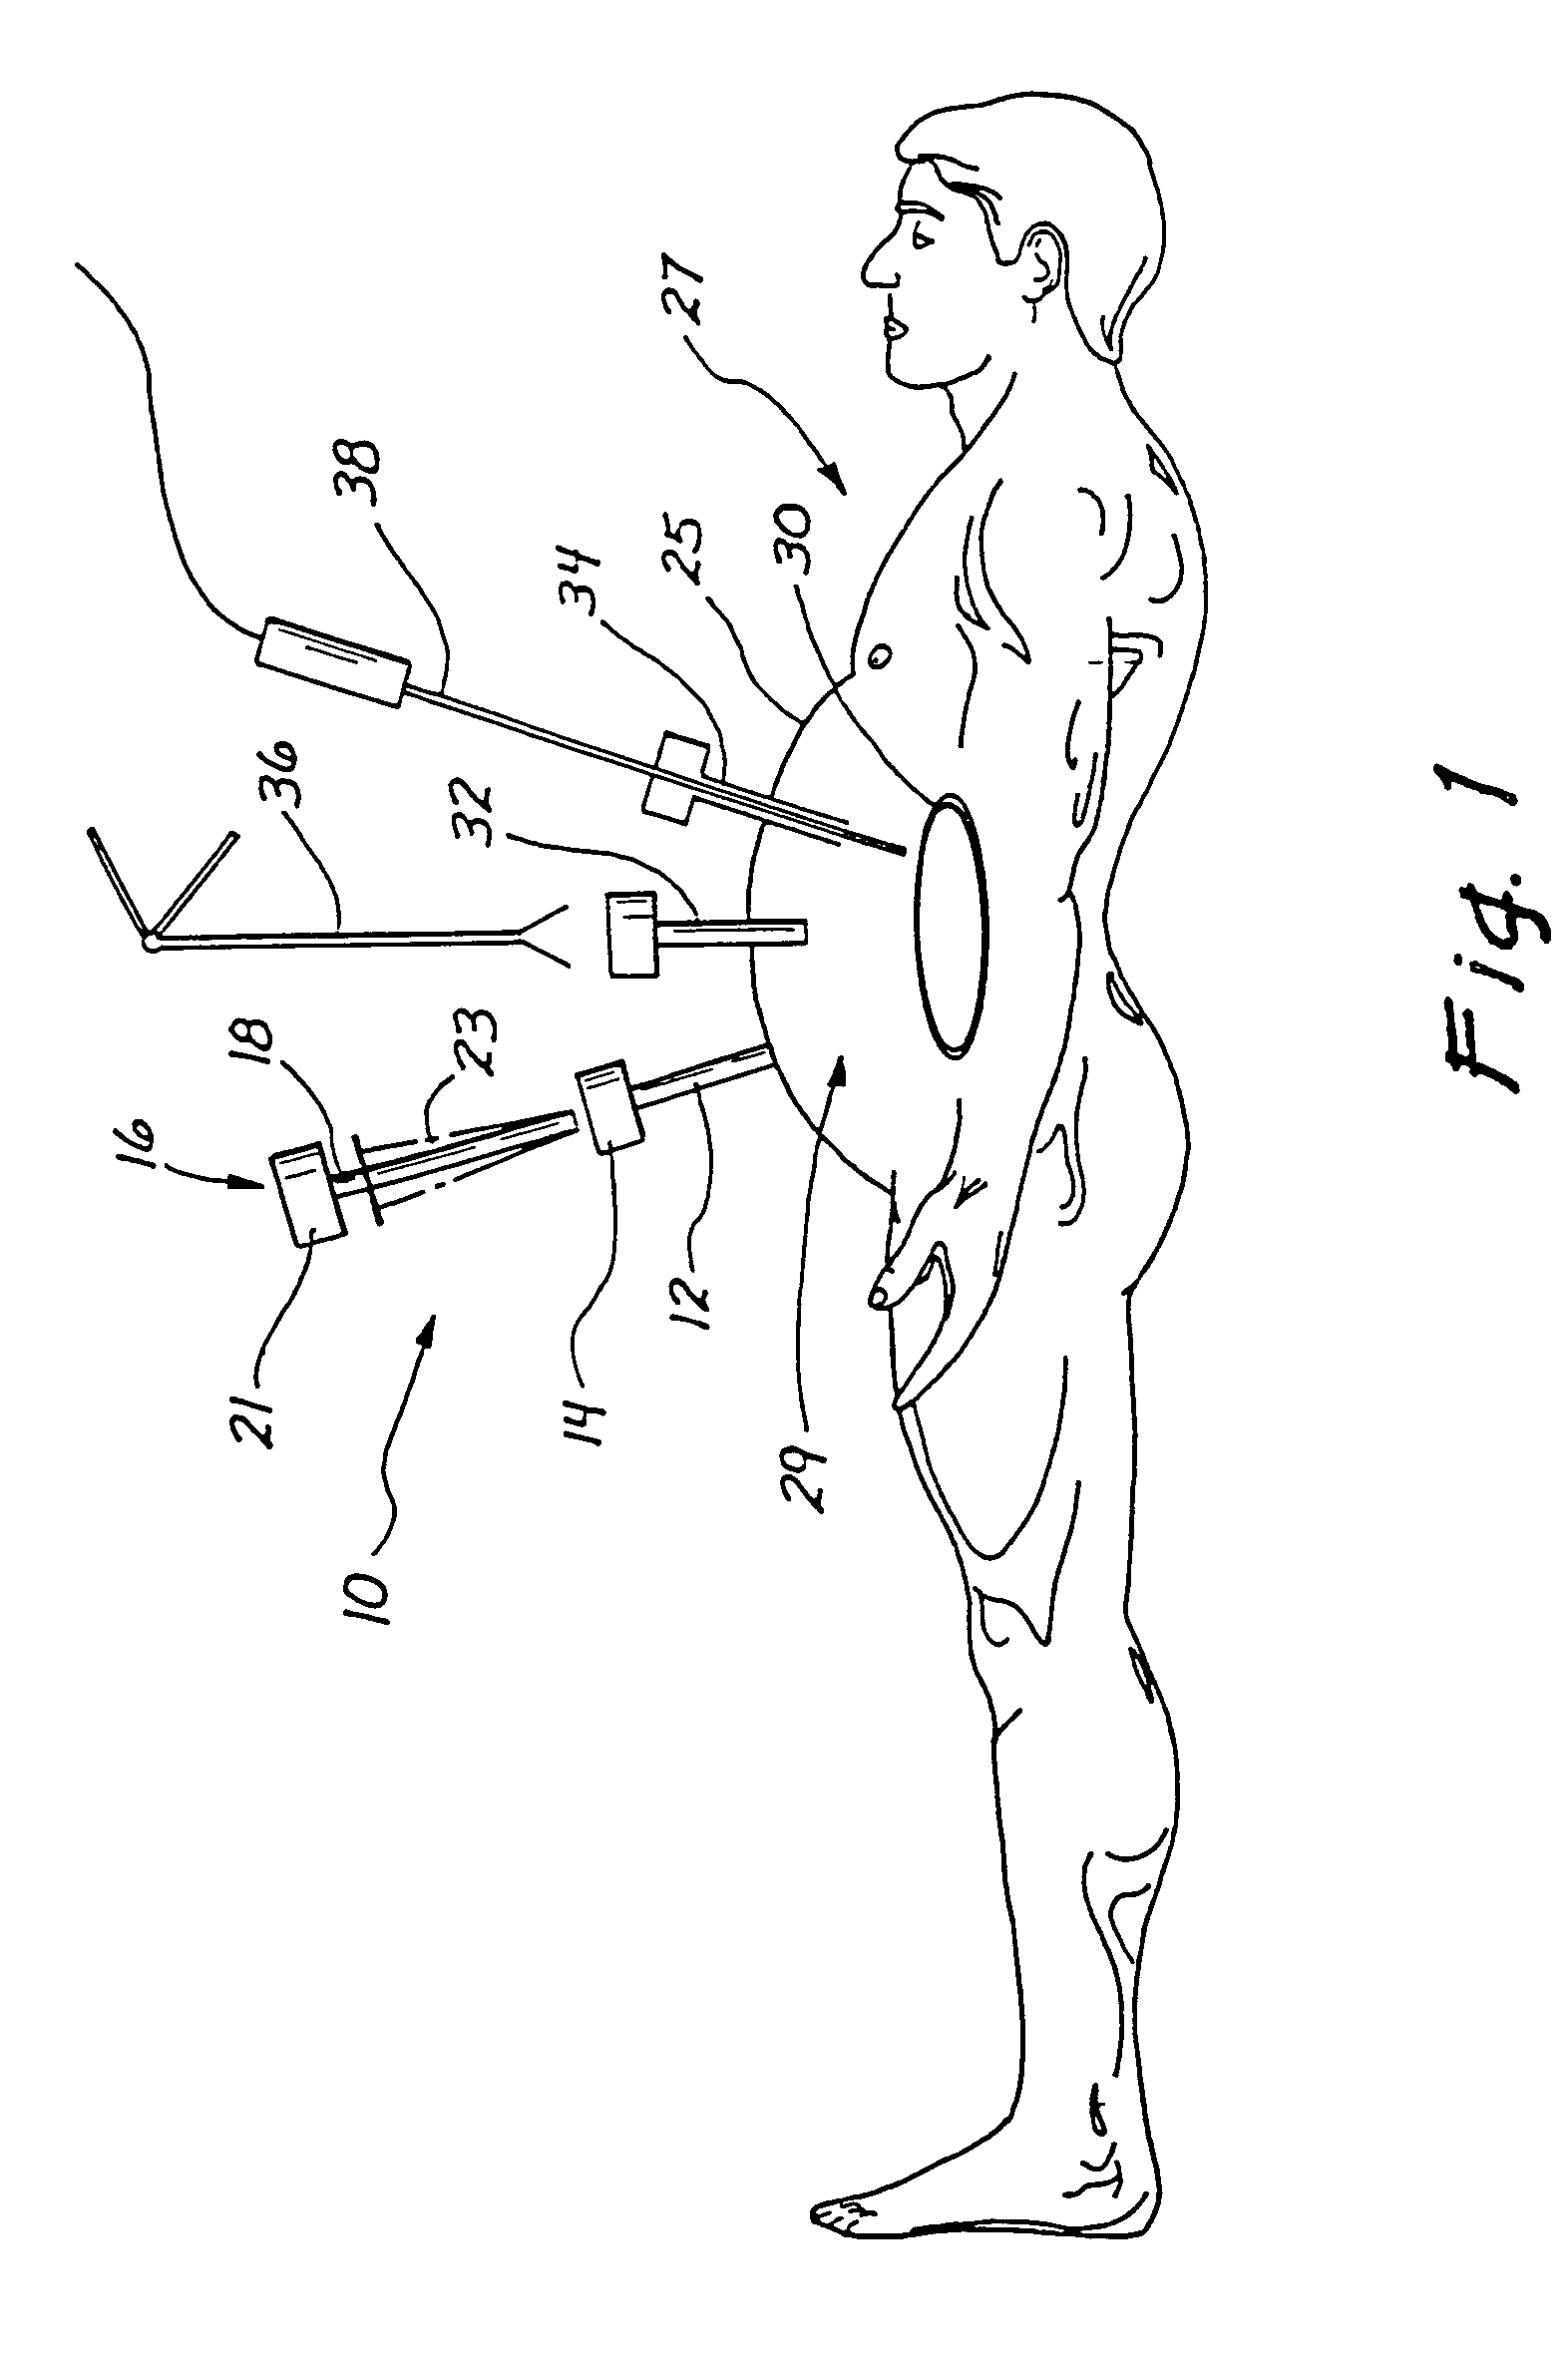 Traction trocar apparatus and method